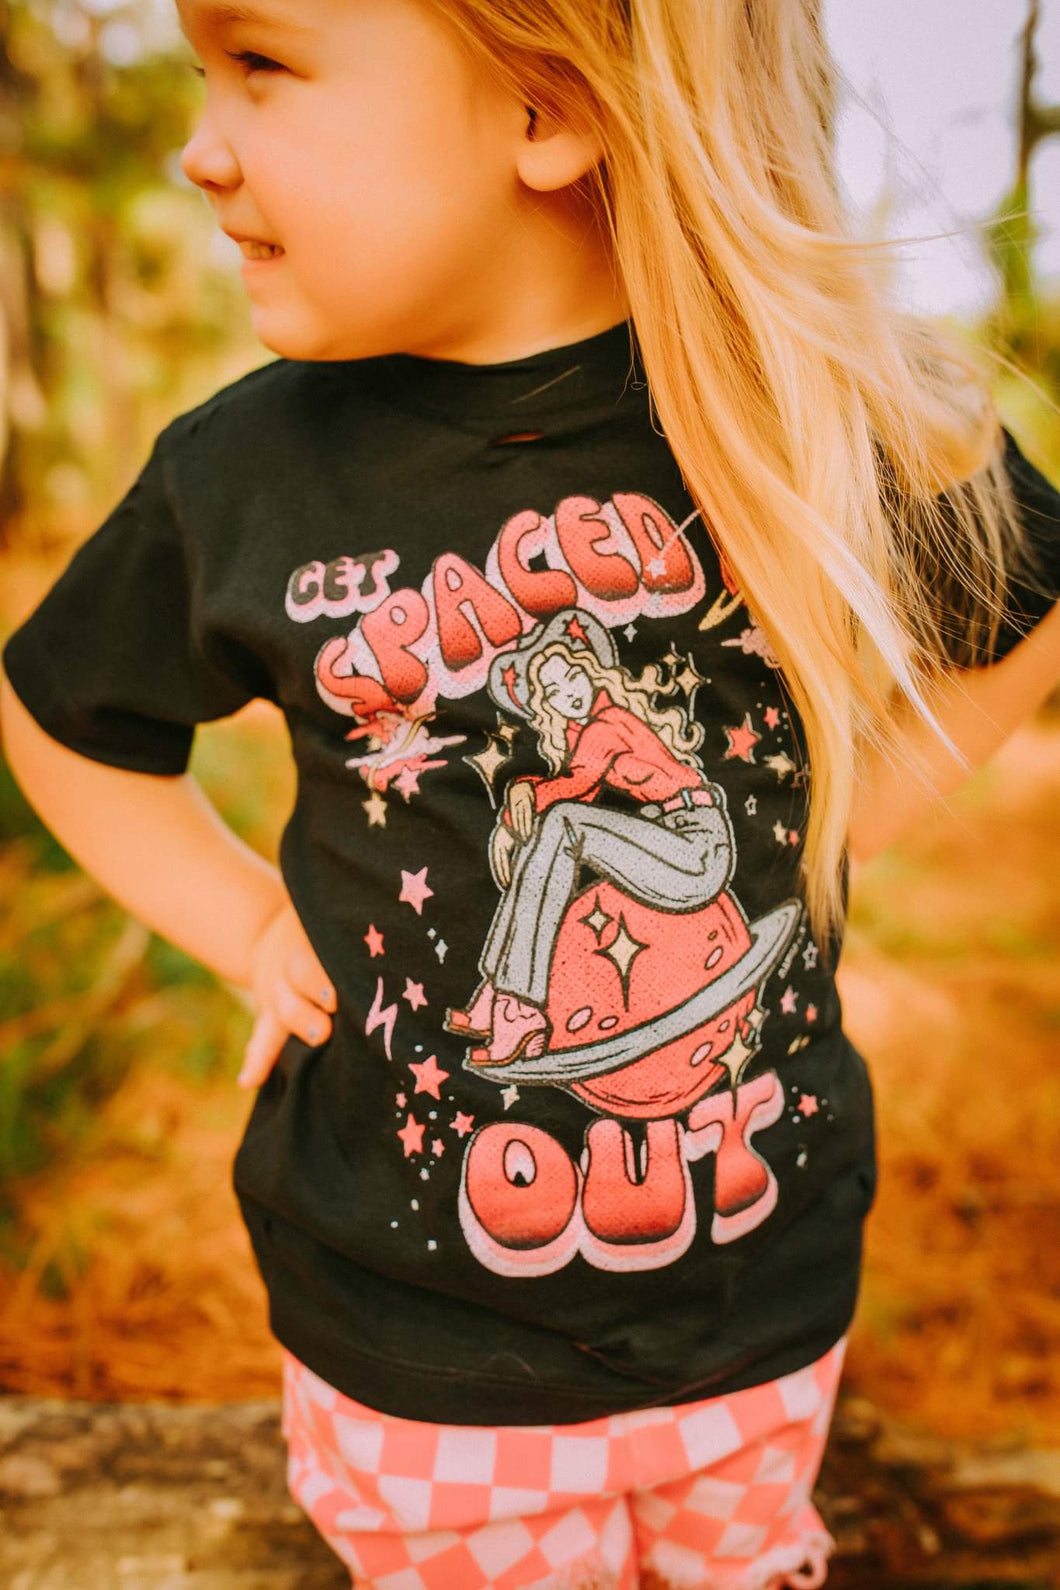 Get Spaced out distressed tee